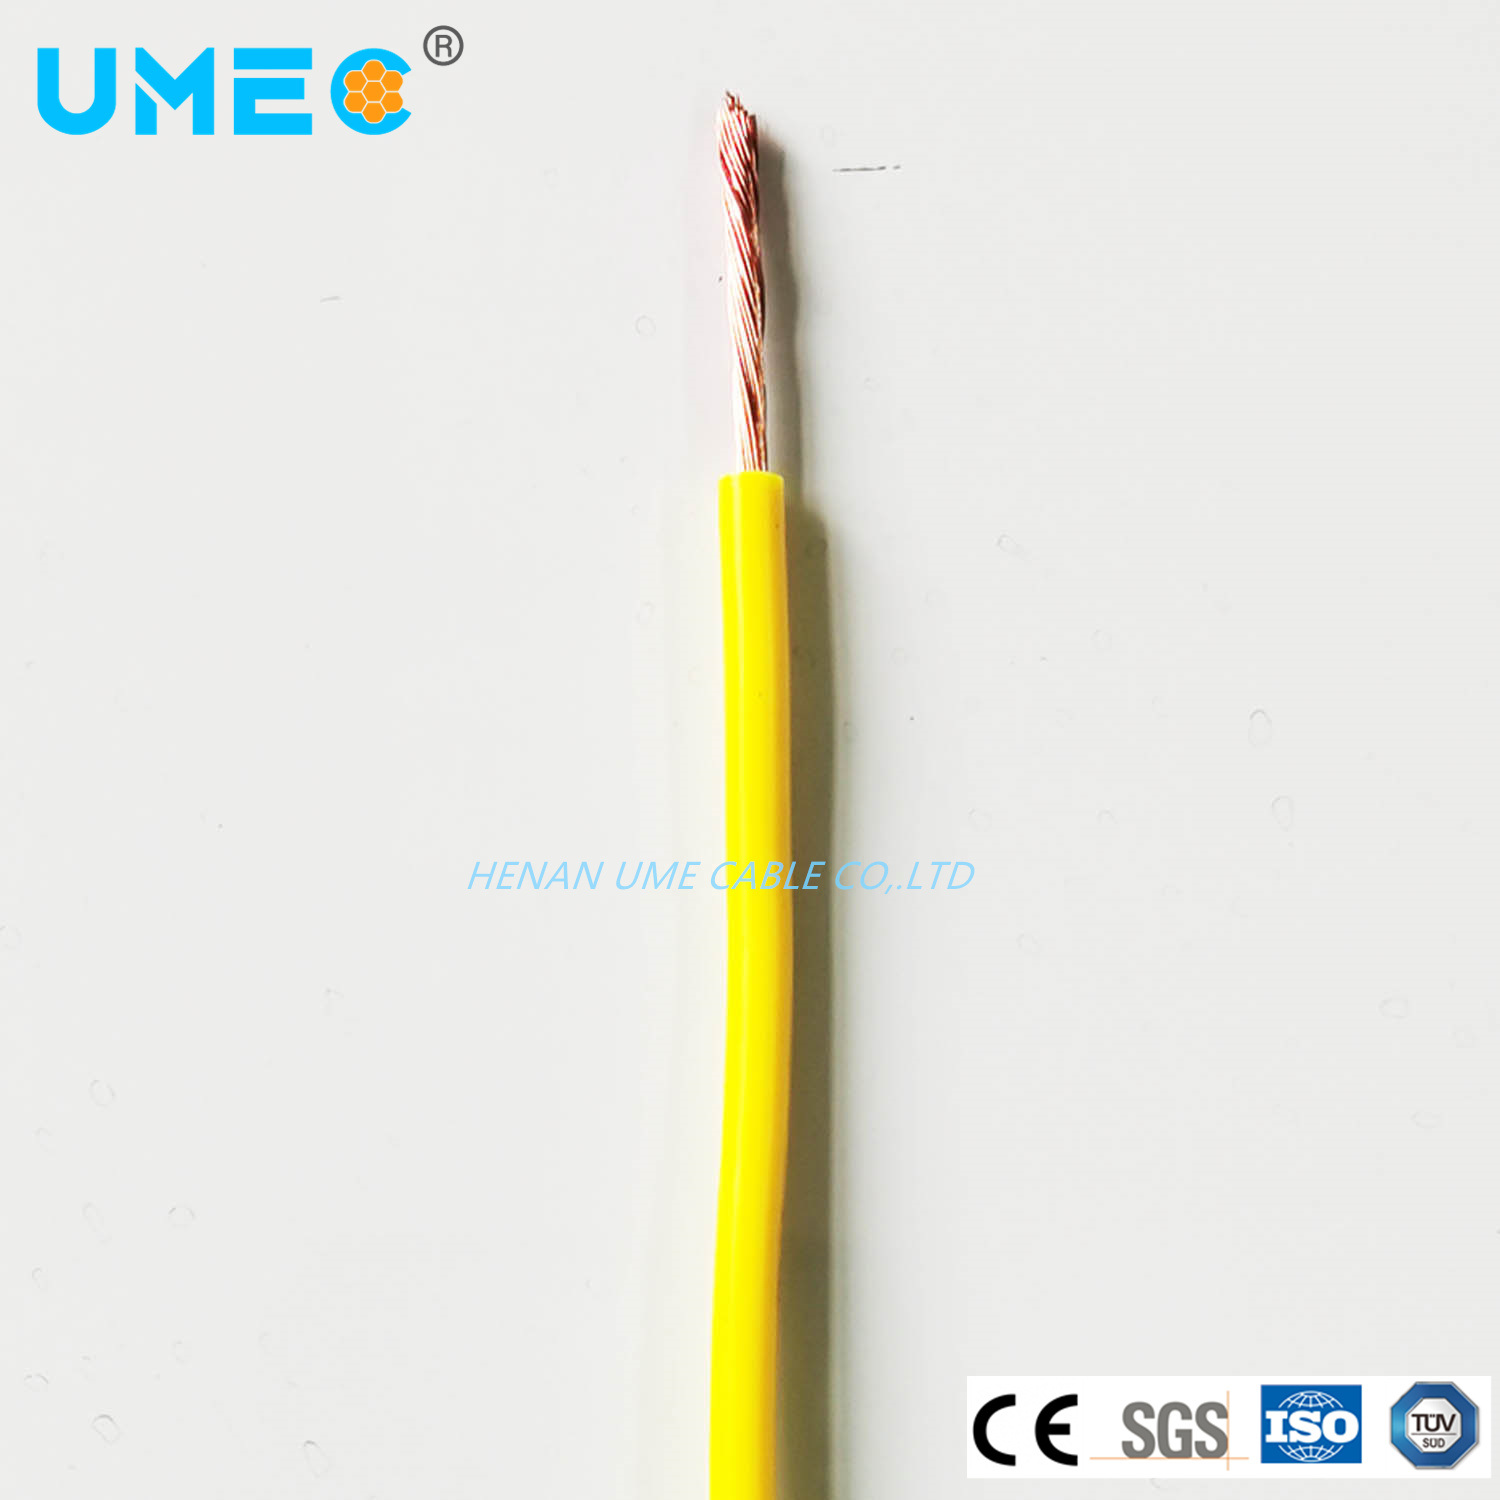 Thhn Thwn 10 12 14 AWG Cable Electrical Copper Conductor PVC Insulated Nylon Sheathed Cable Thw Building Wire Cable Factory Direct